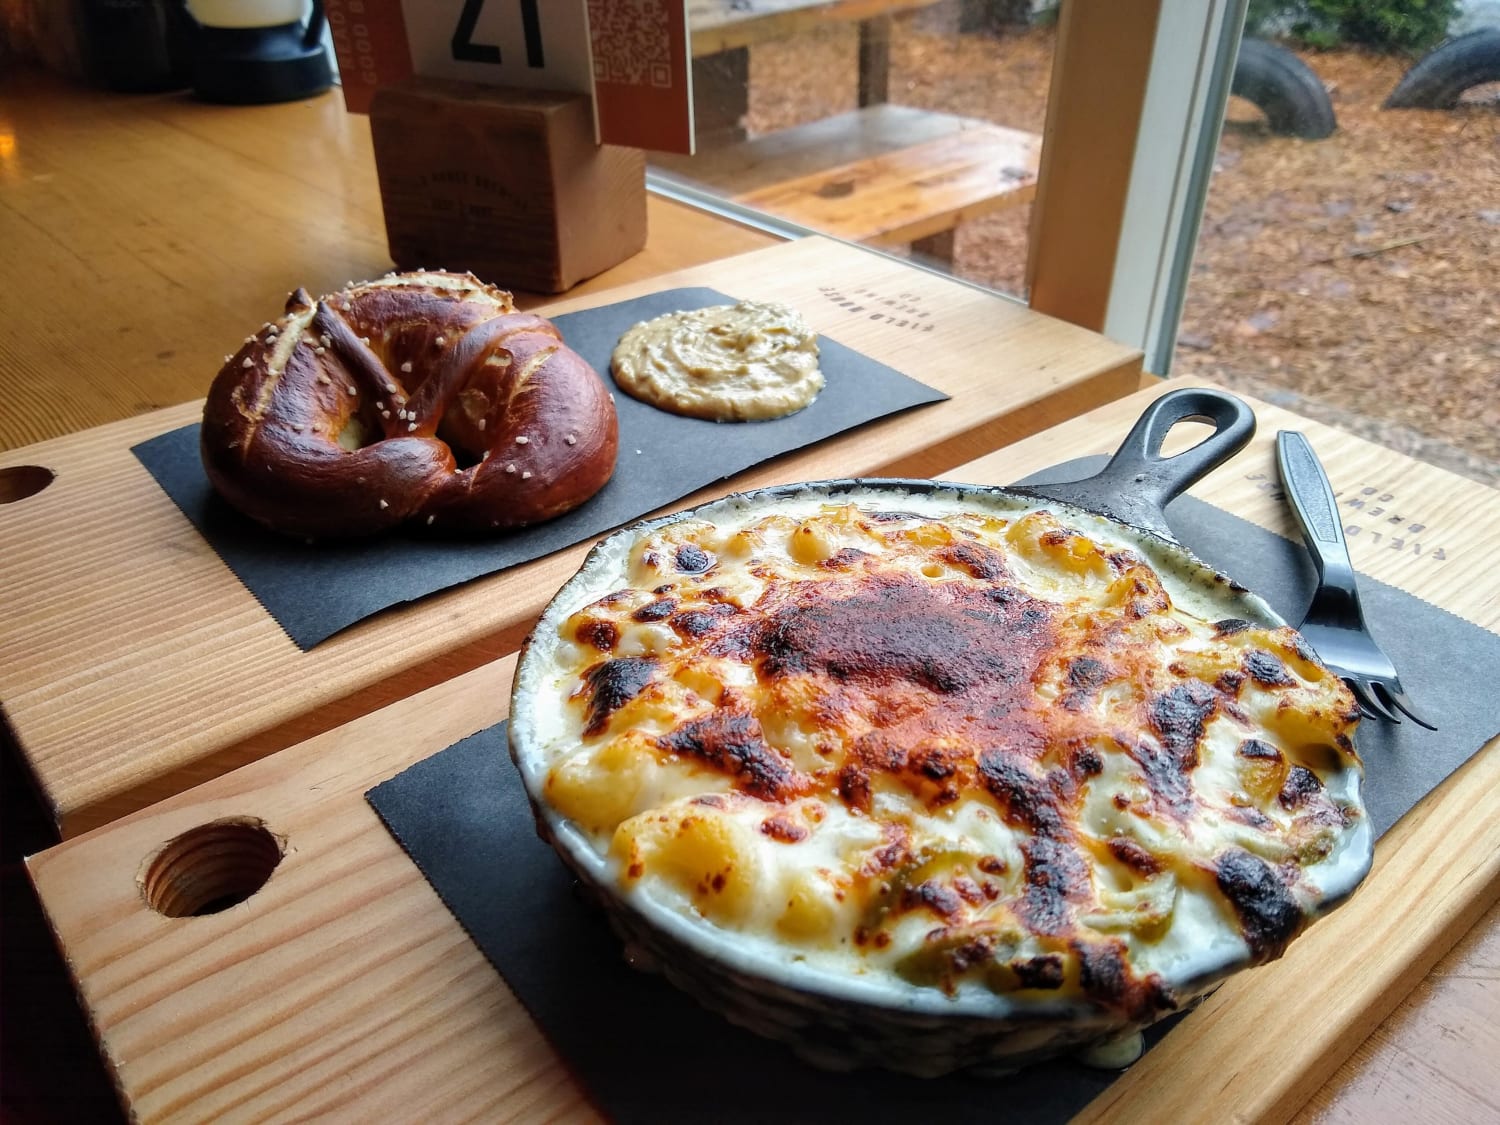 [I ate] Spicy mac n' cheese with Gruyere, Emmental and pickled peppers, and a soft pretzel